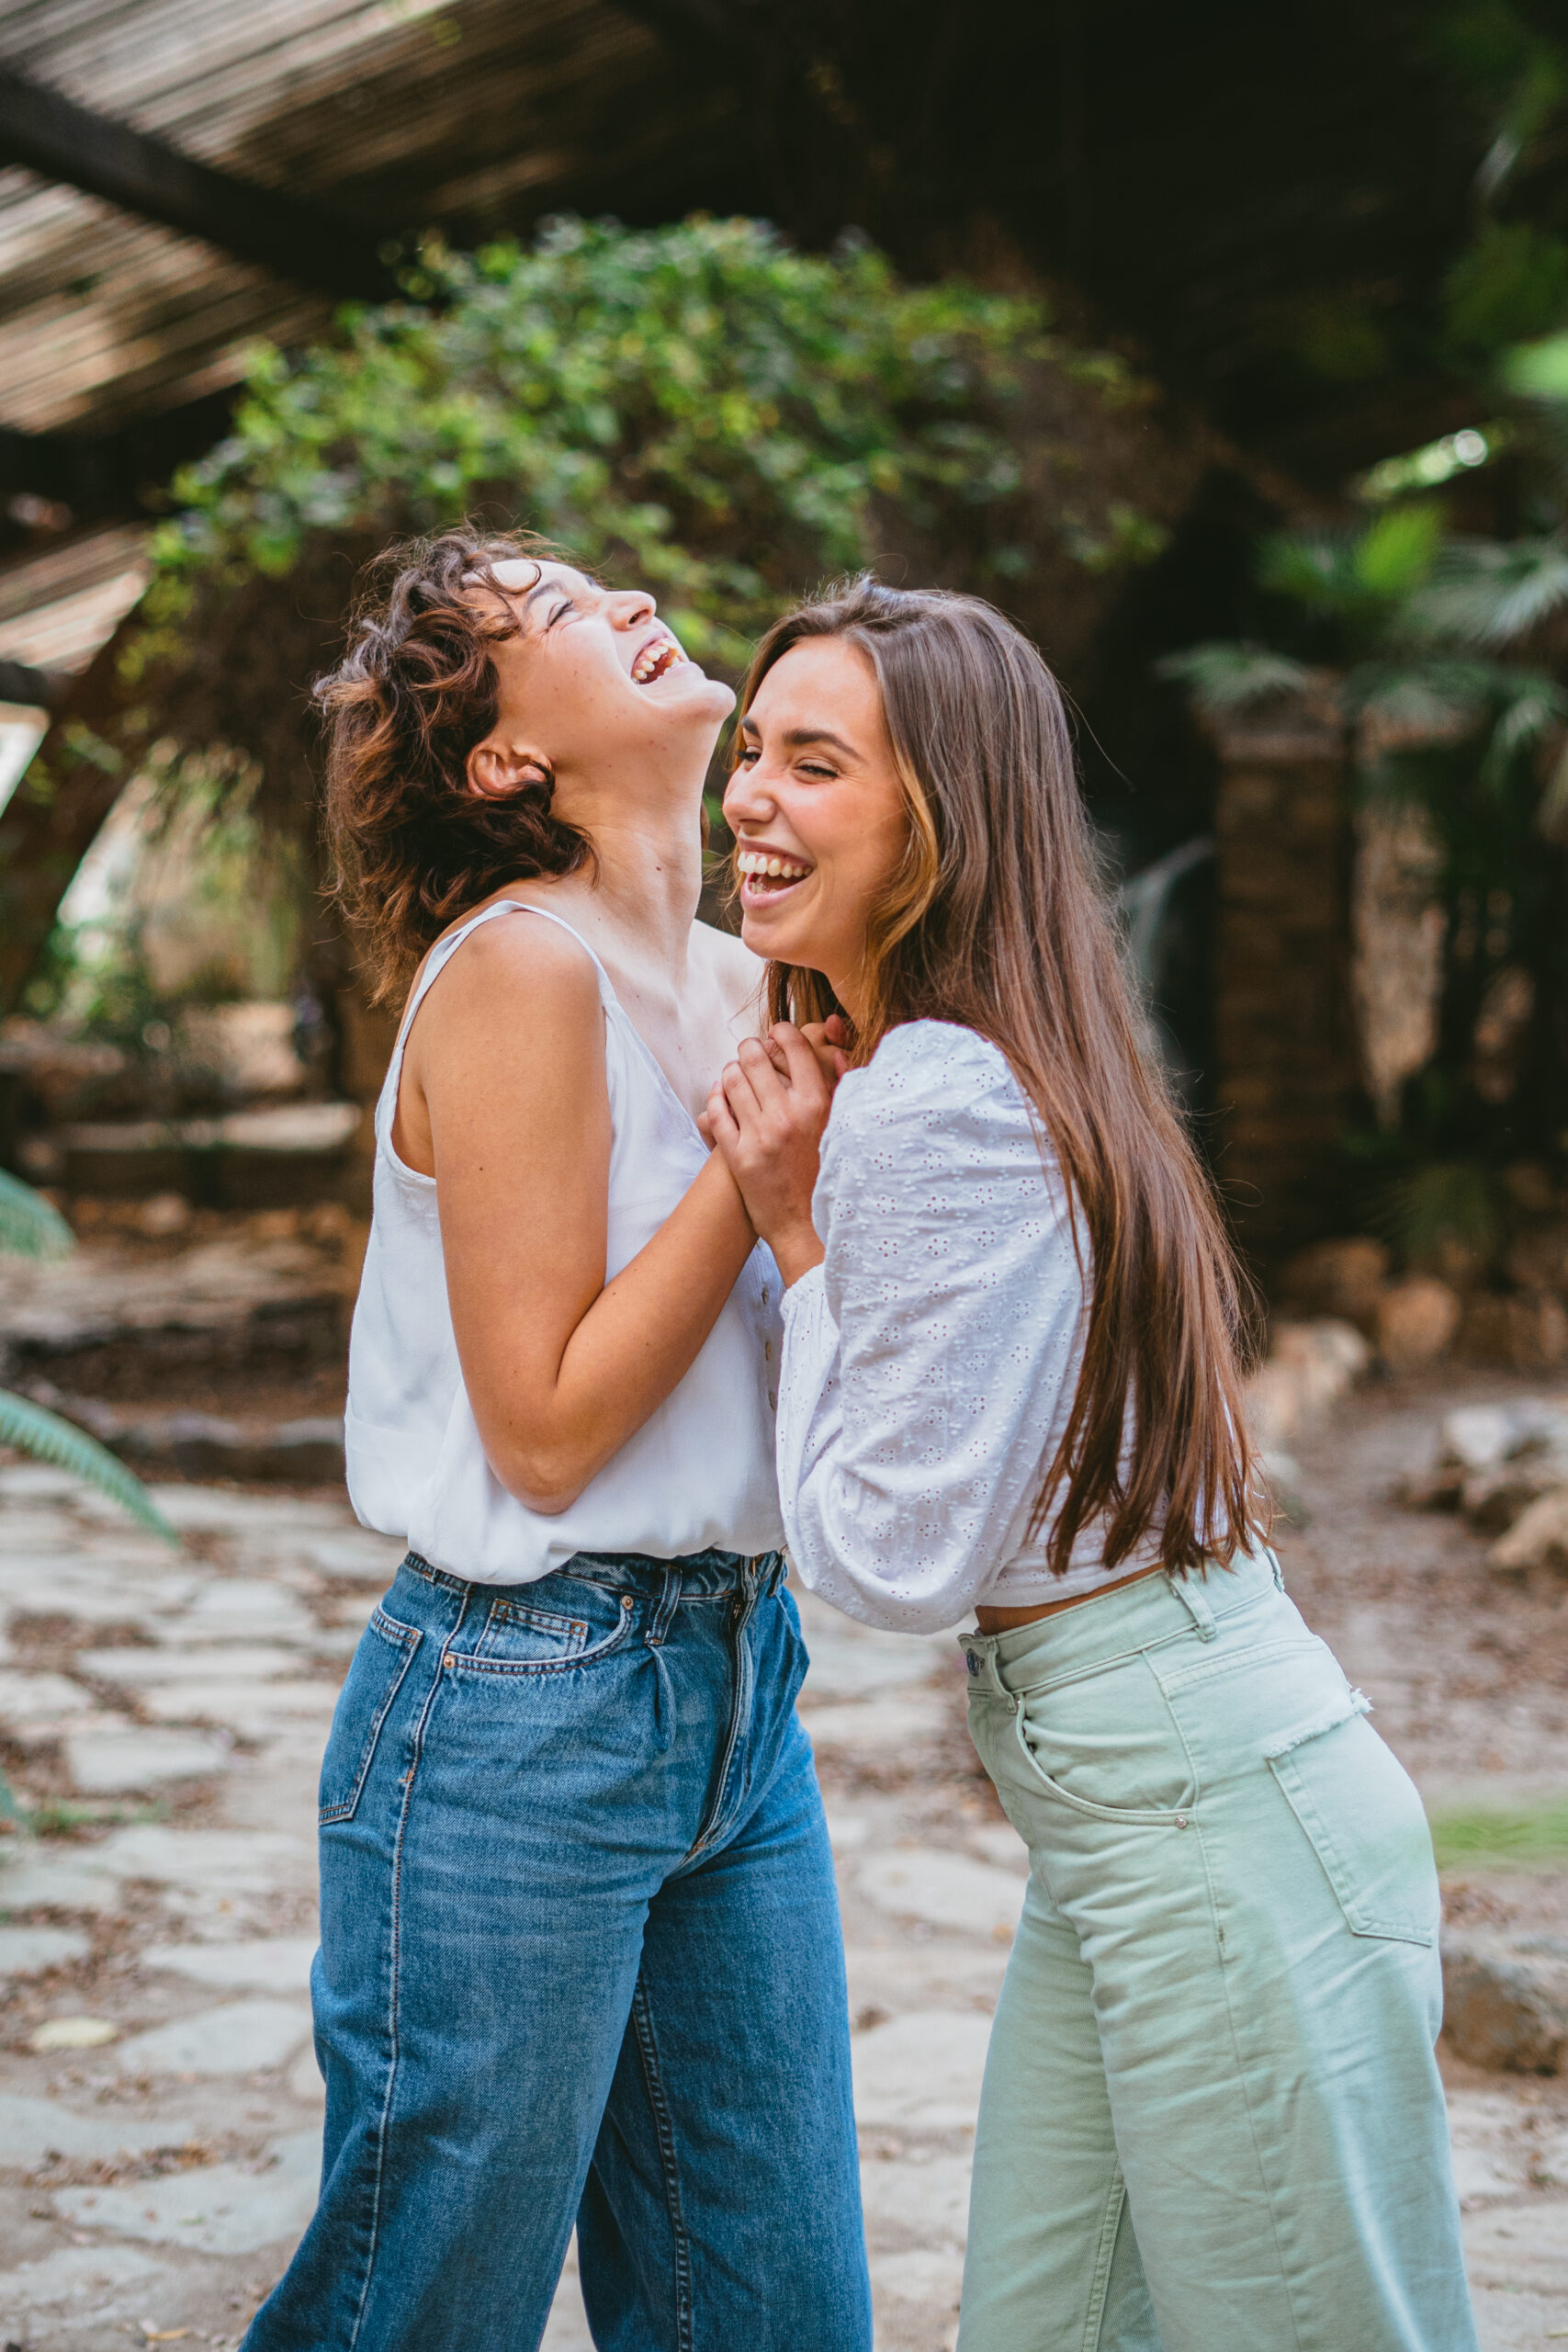 Two young teenager girl friends laughing surrounded by plants